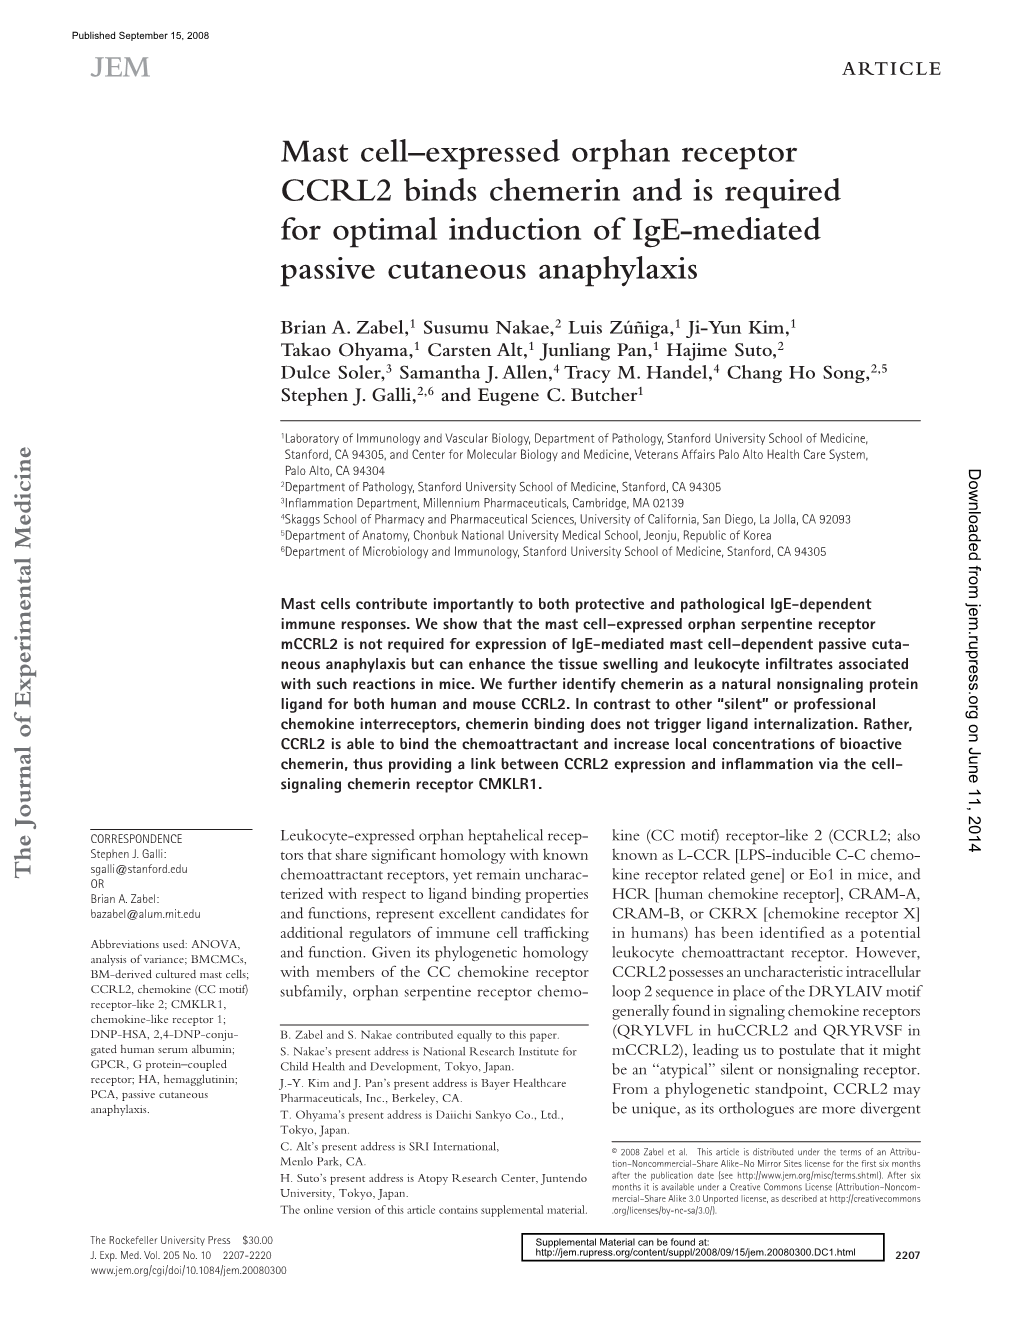 Mast Cell – Expressed Orphan Receptor CCRL2 Binds Chemerin and Is